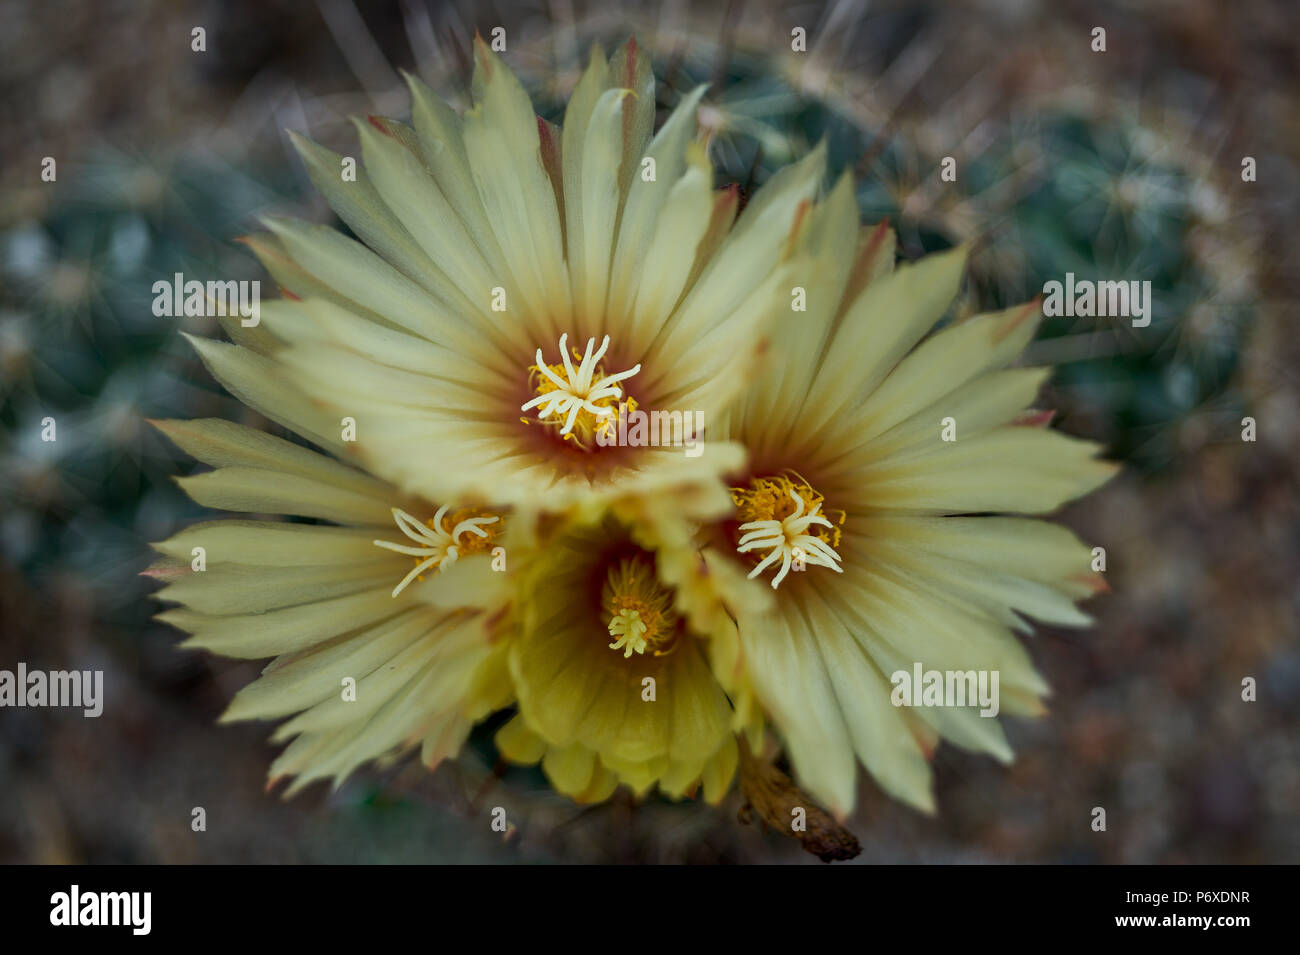 Lush multiple yellow cactus flowers Coryphantha beehive cactus lush blossom flowering blooming flowers close up Stock Photo